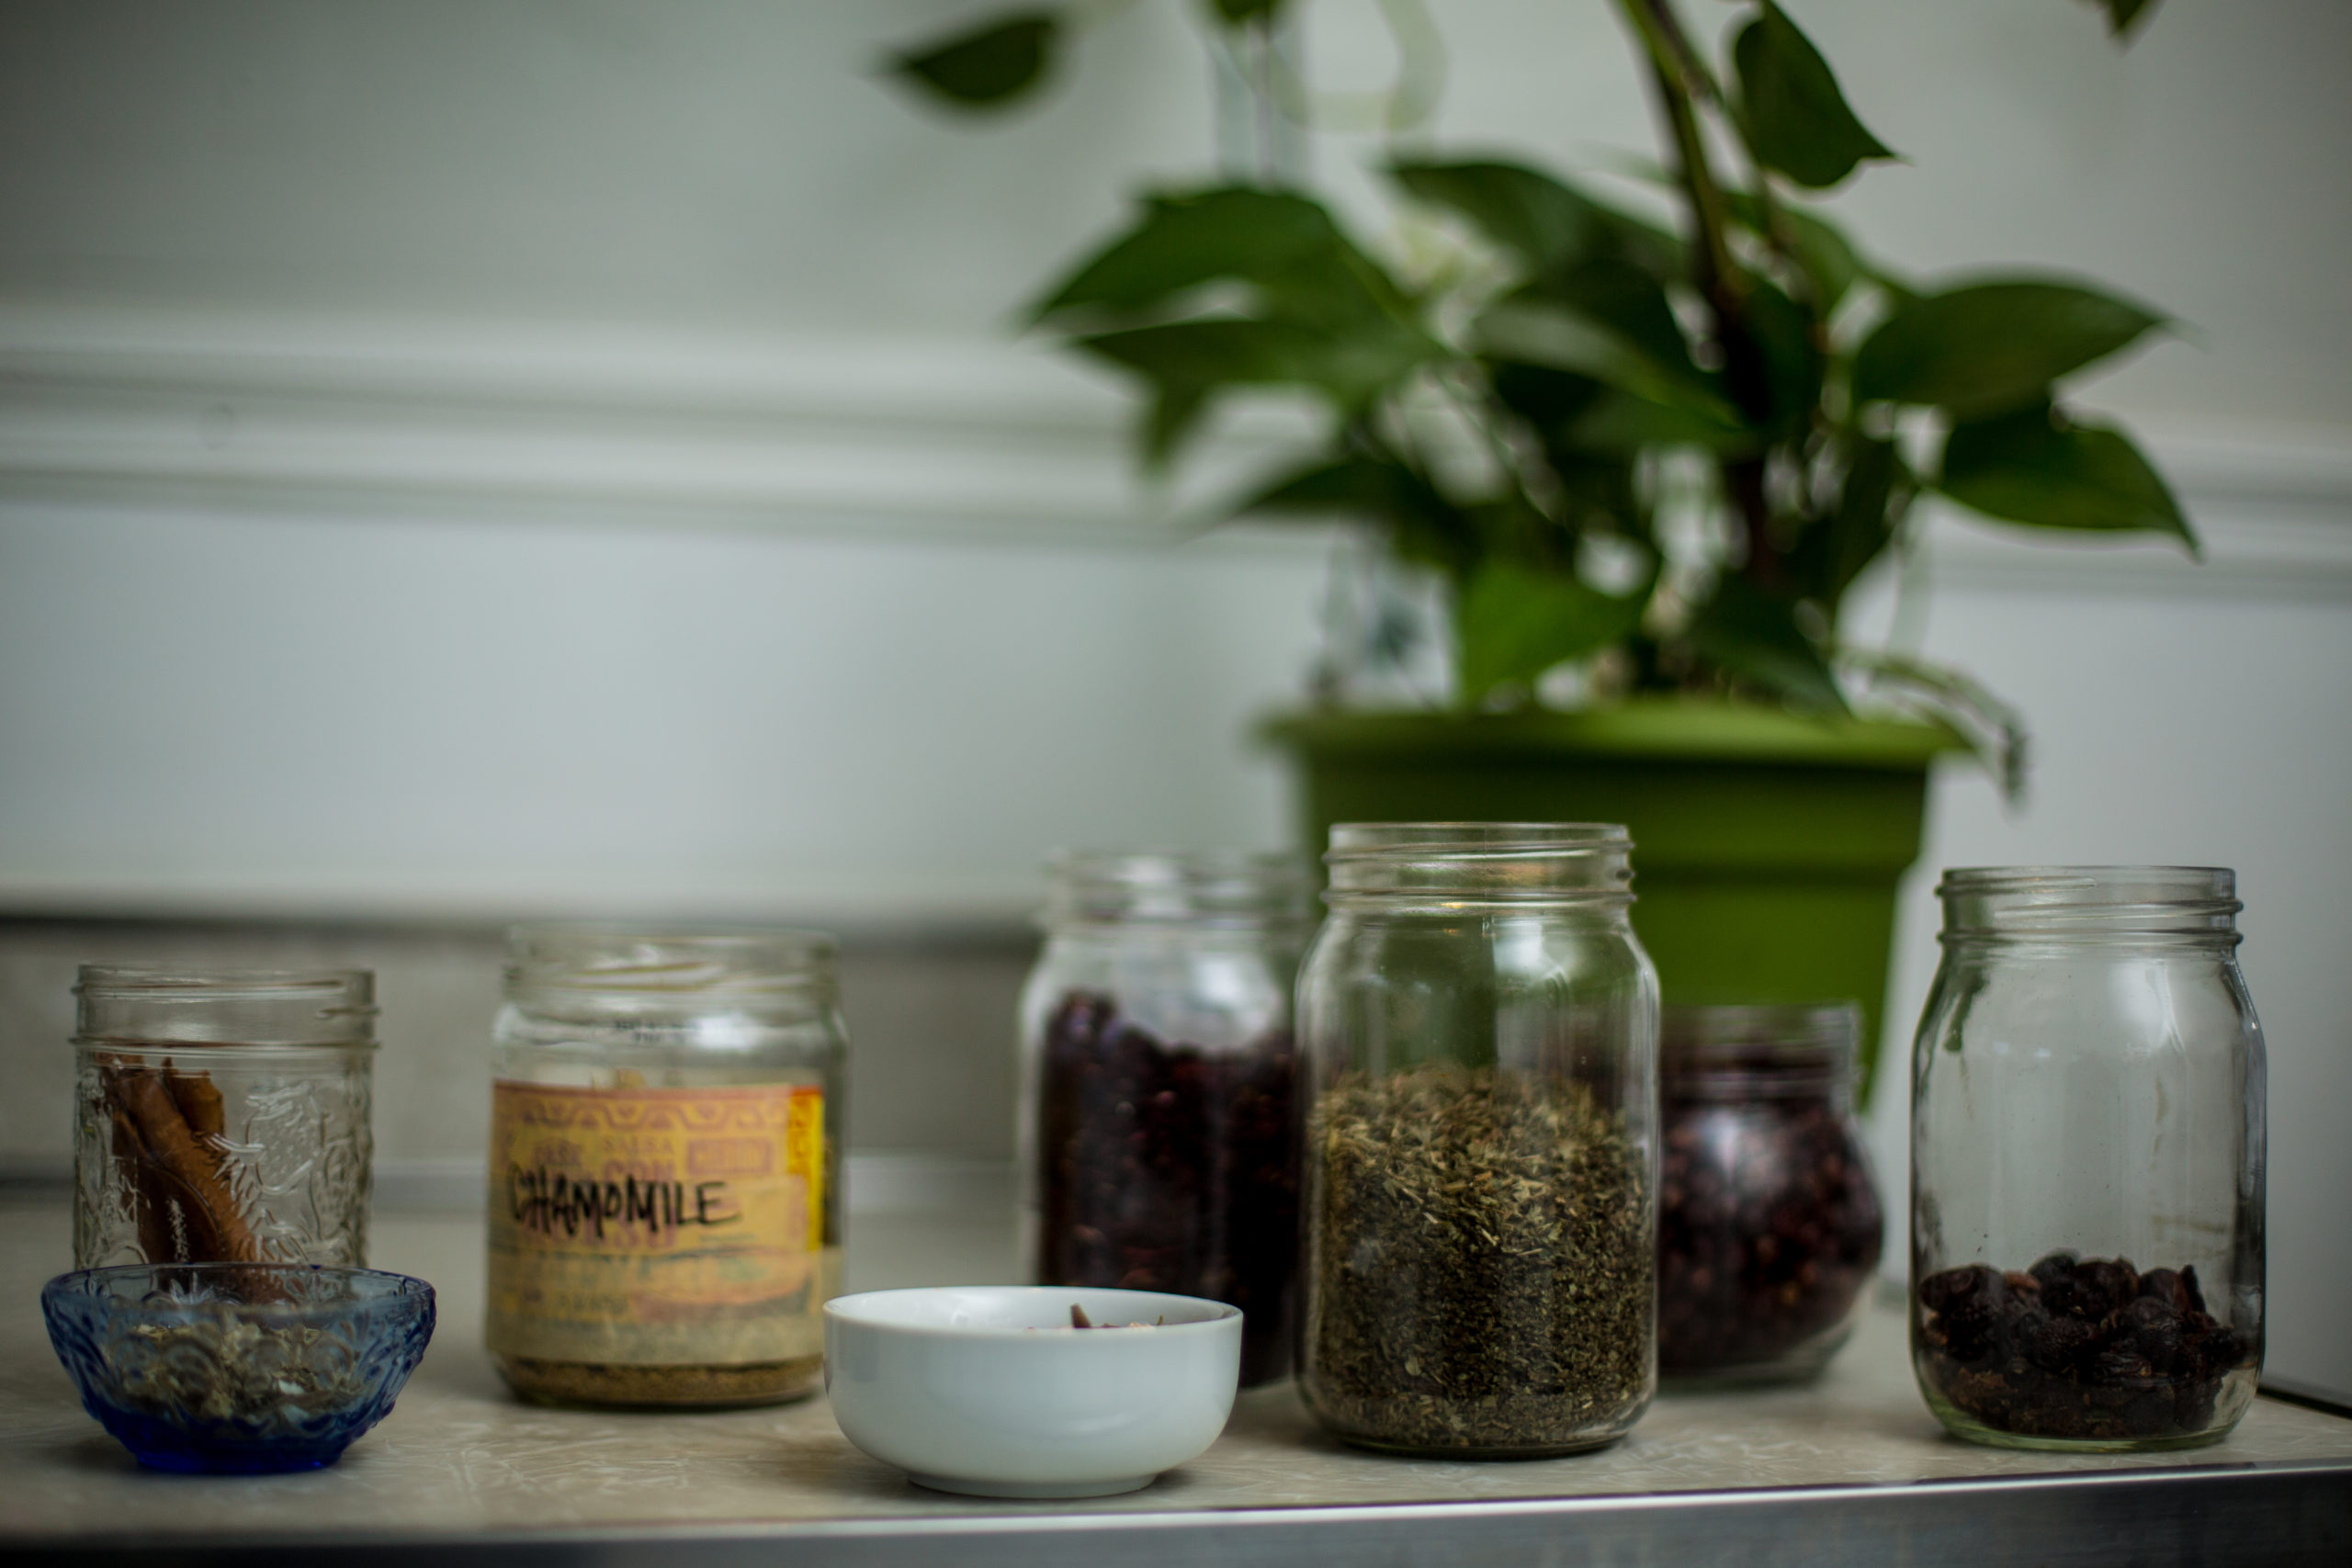 Ingredients for looseleaf teas in brand photography session